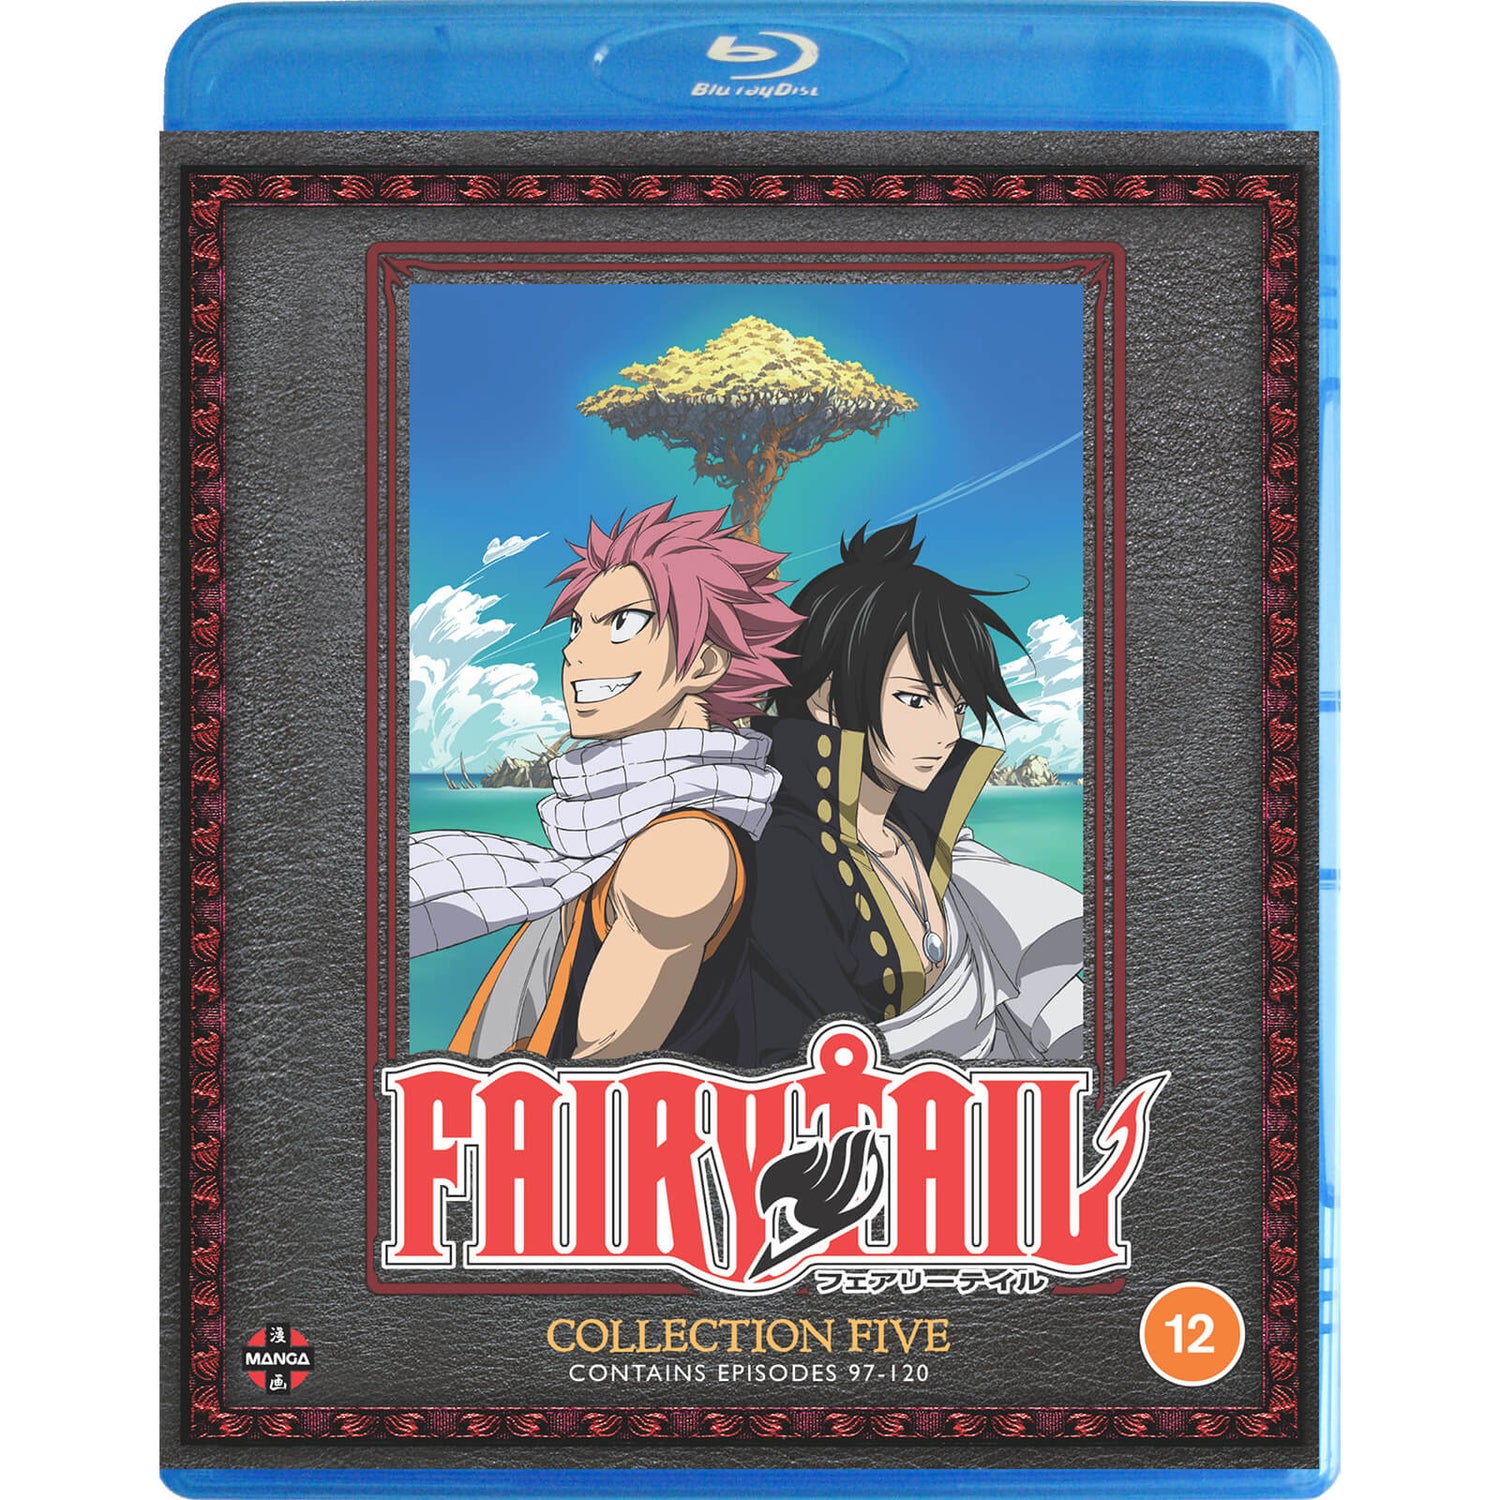 Fairy Tail Collection 5 (Episodes 97-120)